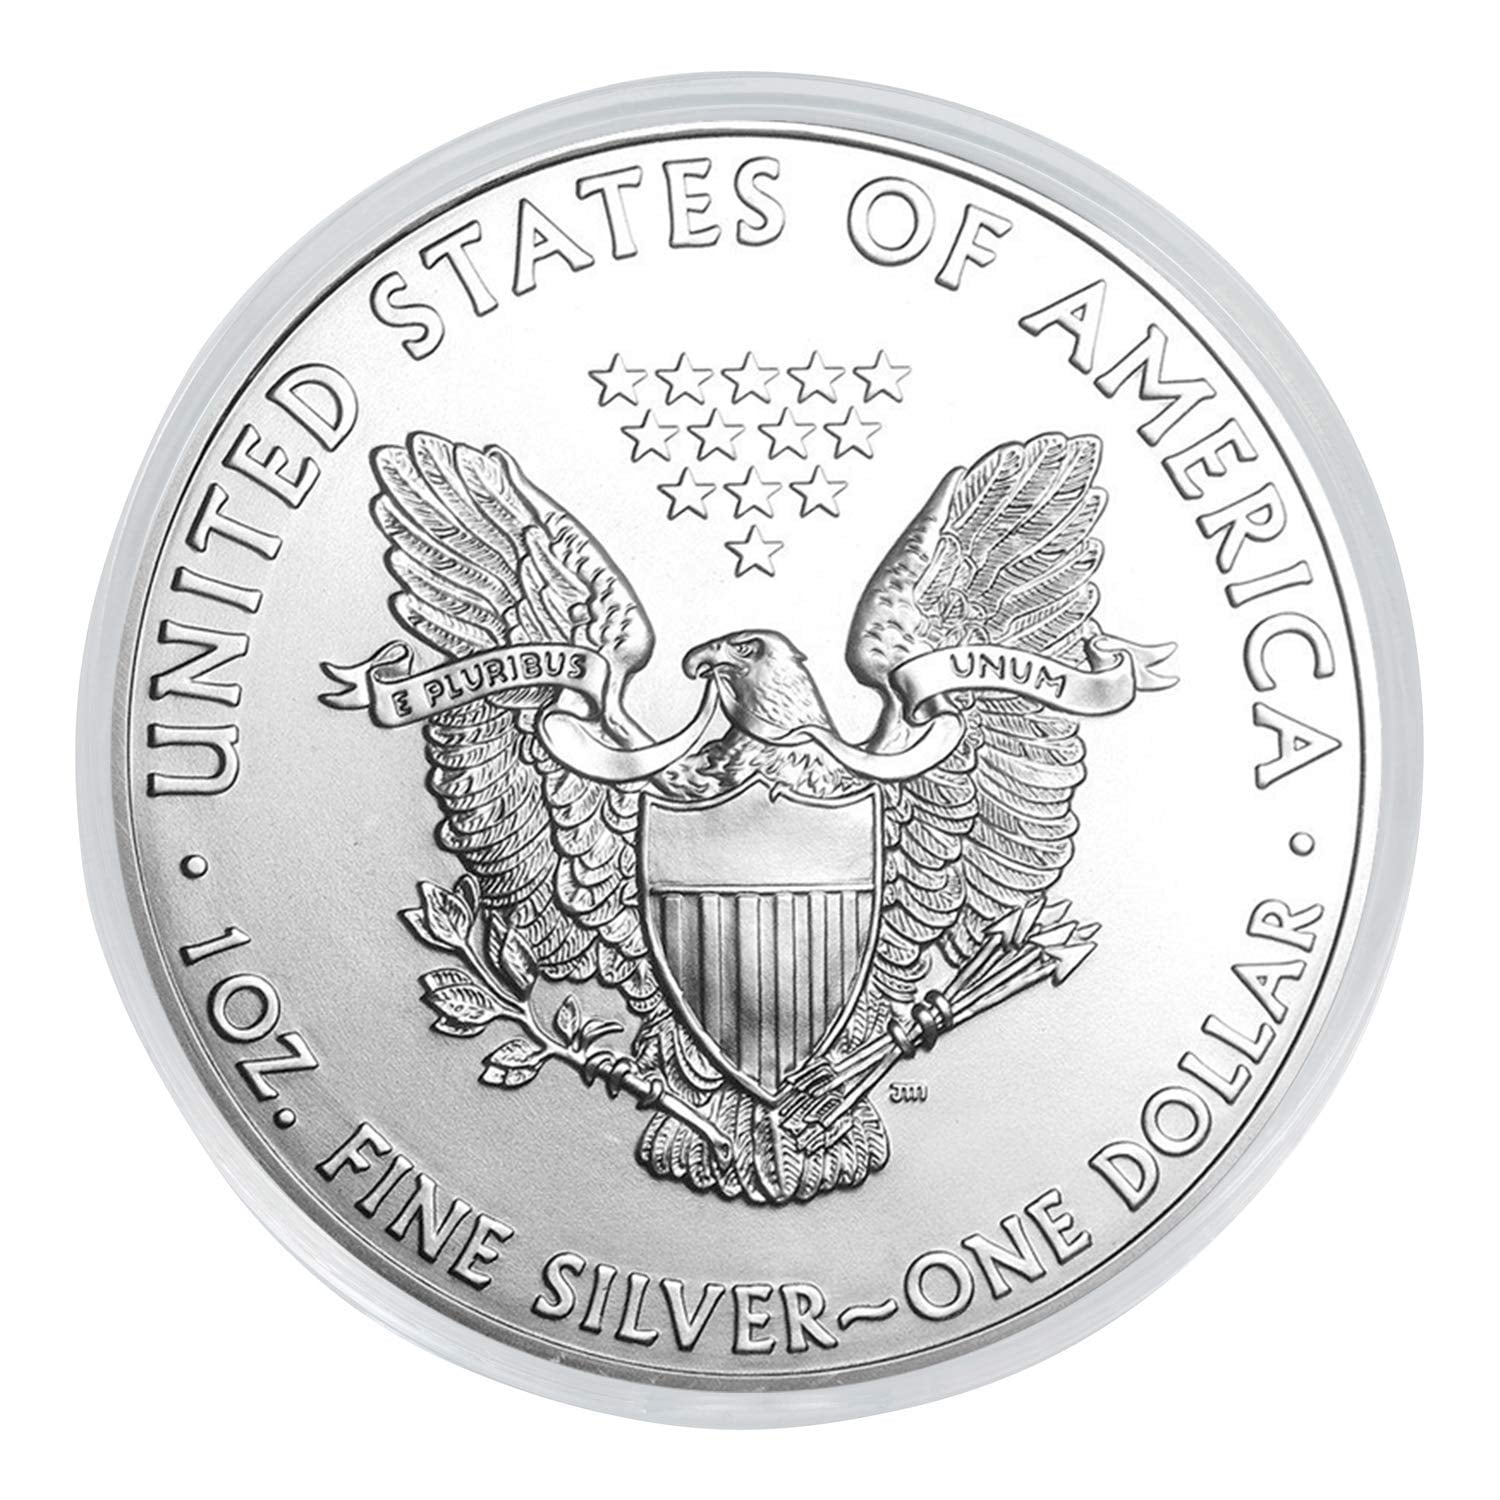 Plastic Air Tite Dollar Coins Capsules Silver Eagle Protector Clear American Collectors Cases Tight Treasures Storage Containers Collection Supplies Houseables Coin Holder 25 Pack 40 mm